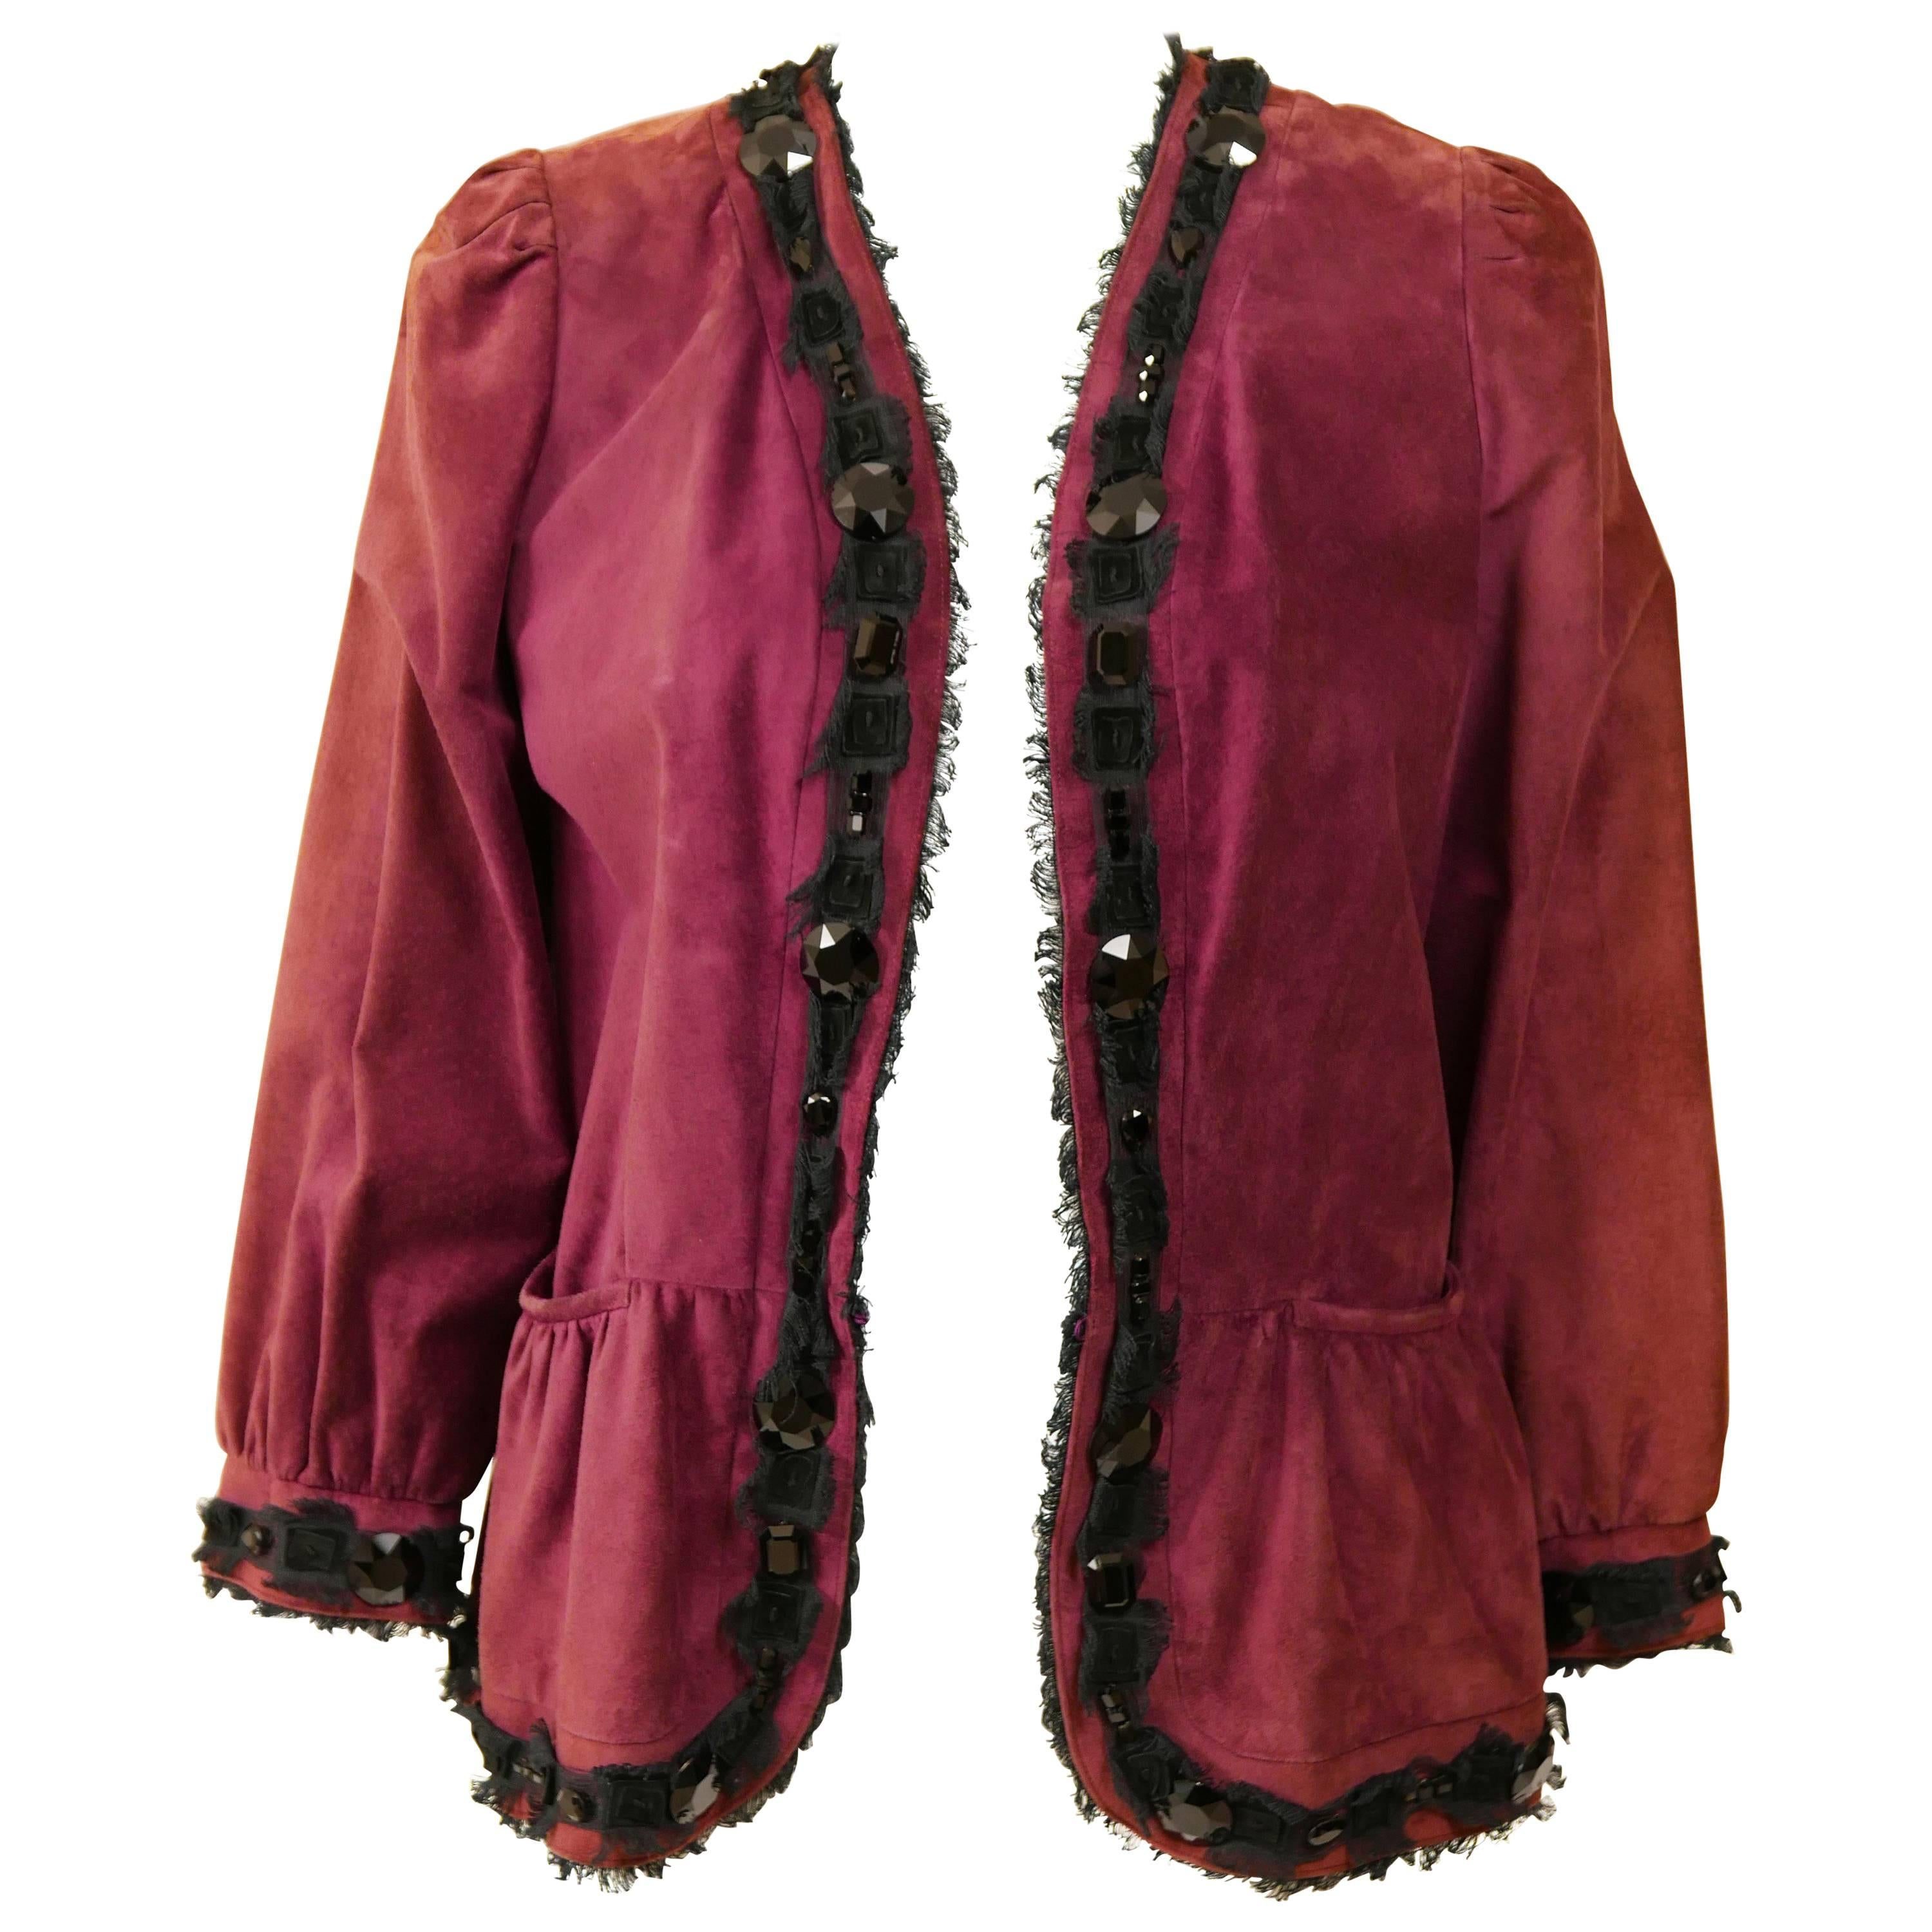 YVES SAINT LAURENT Rive Gauche Maroon Suede Leather Jacket For Sale